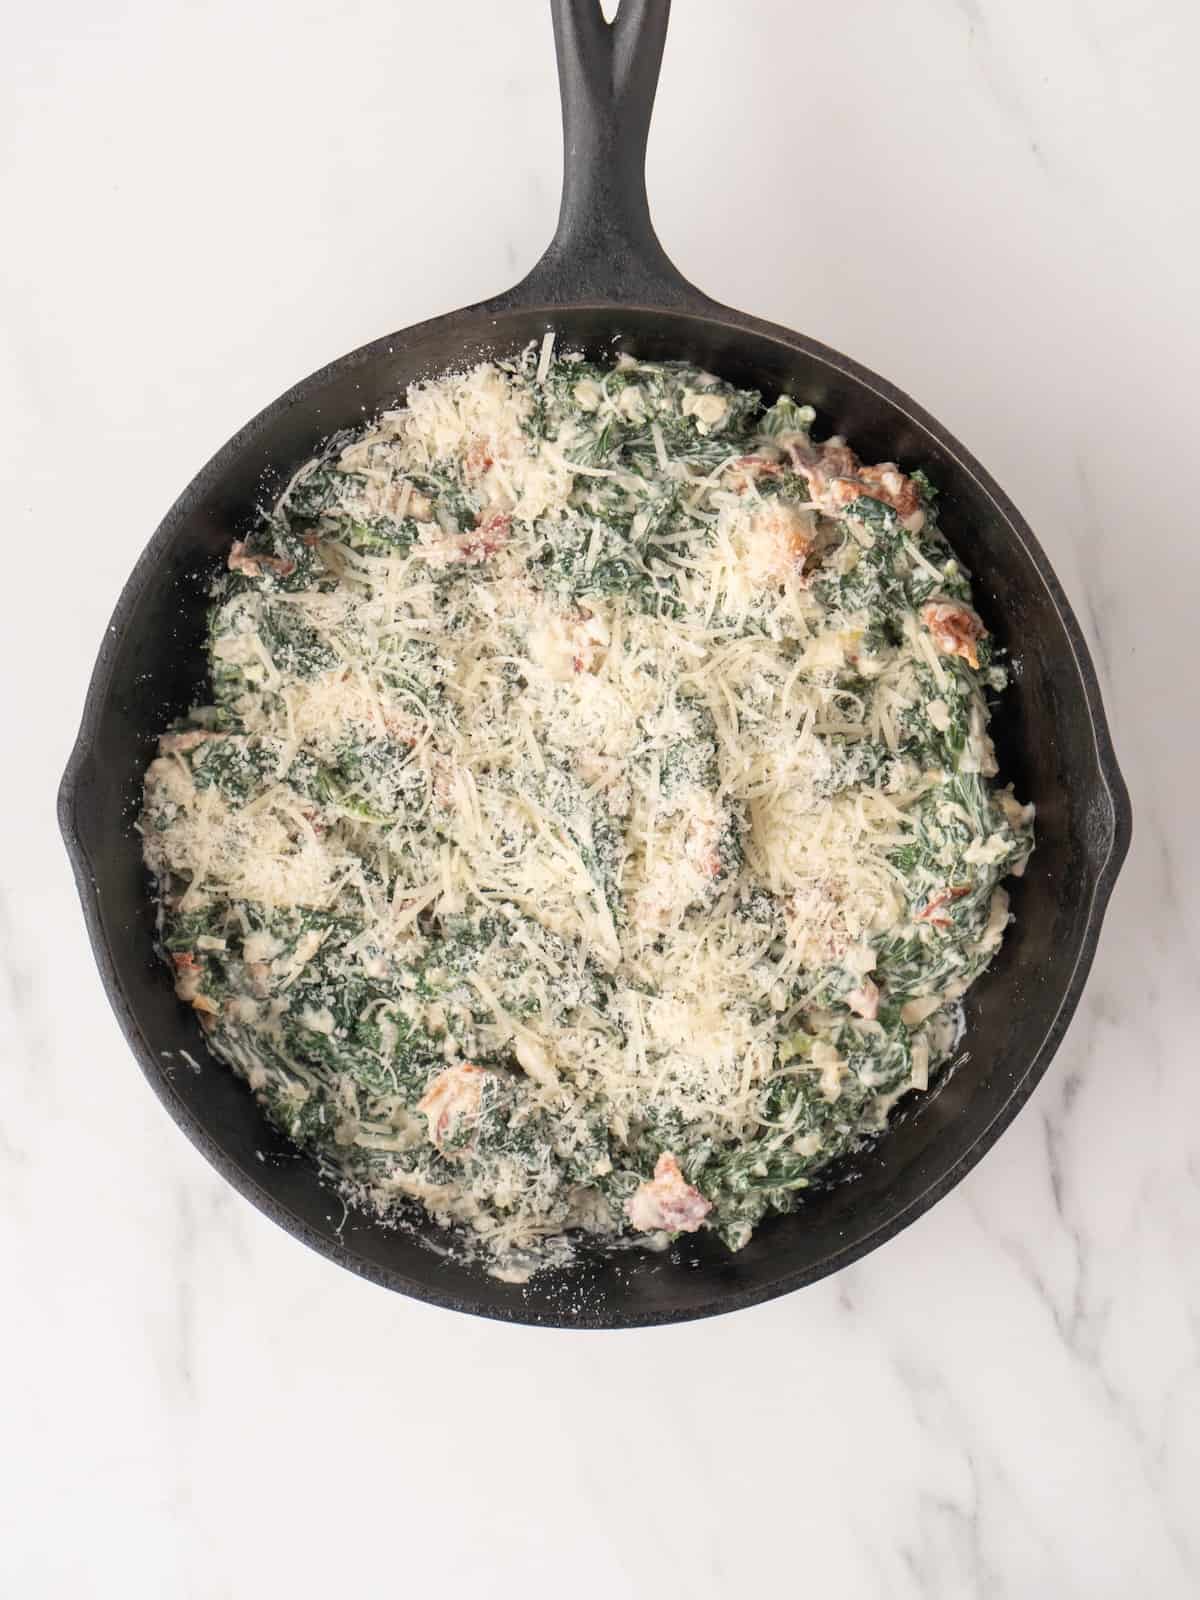 A skillet with hot kale and bacon dip topped with parmesan cheese.